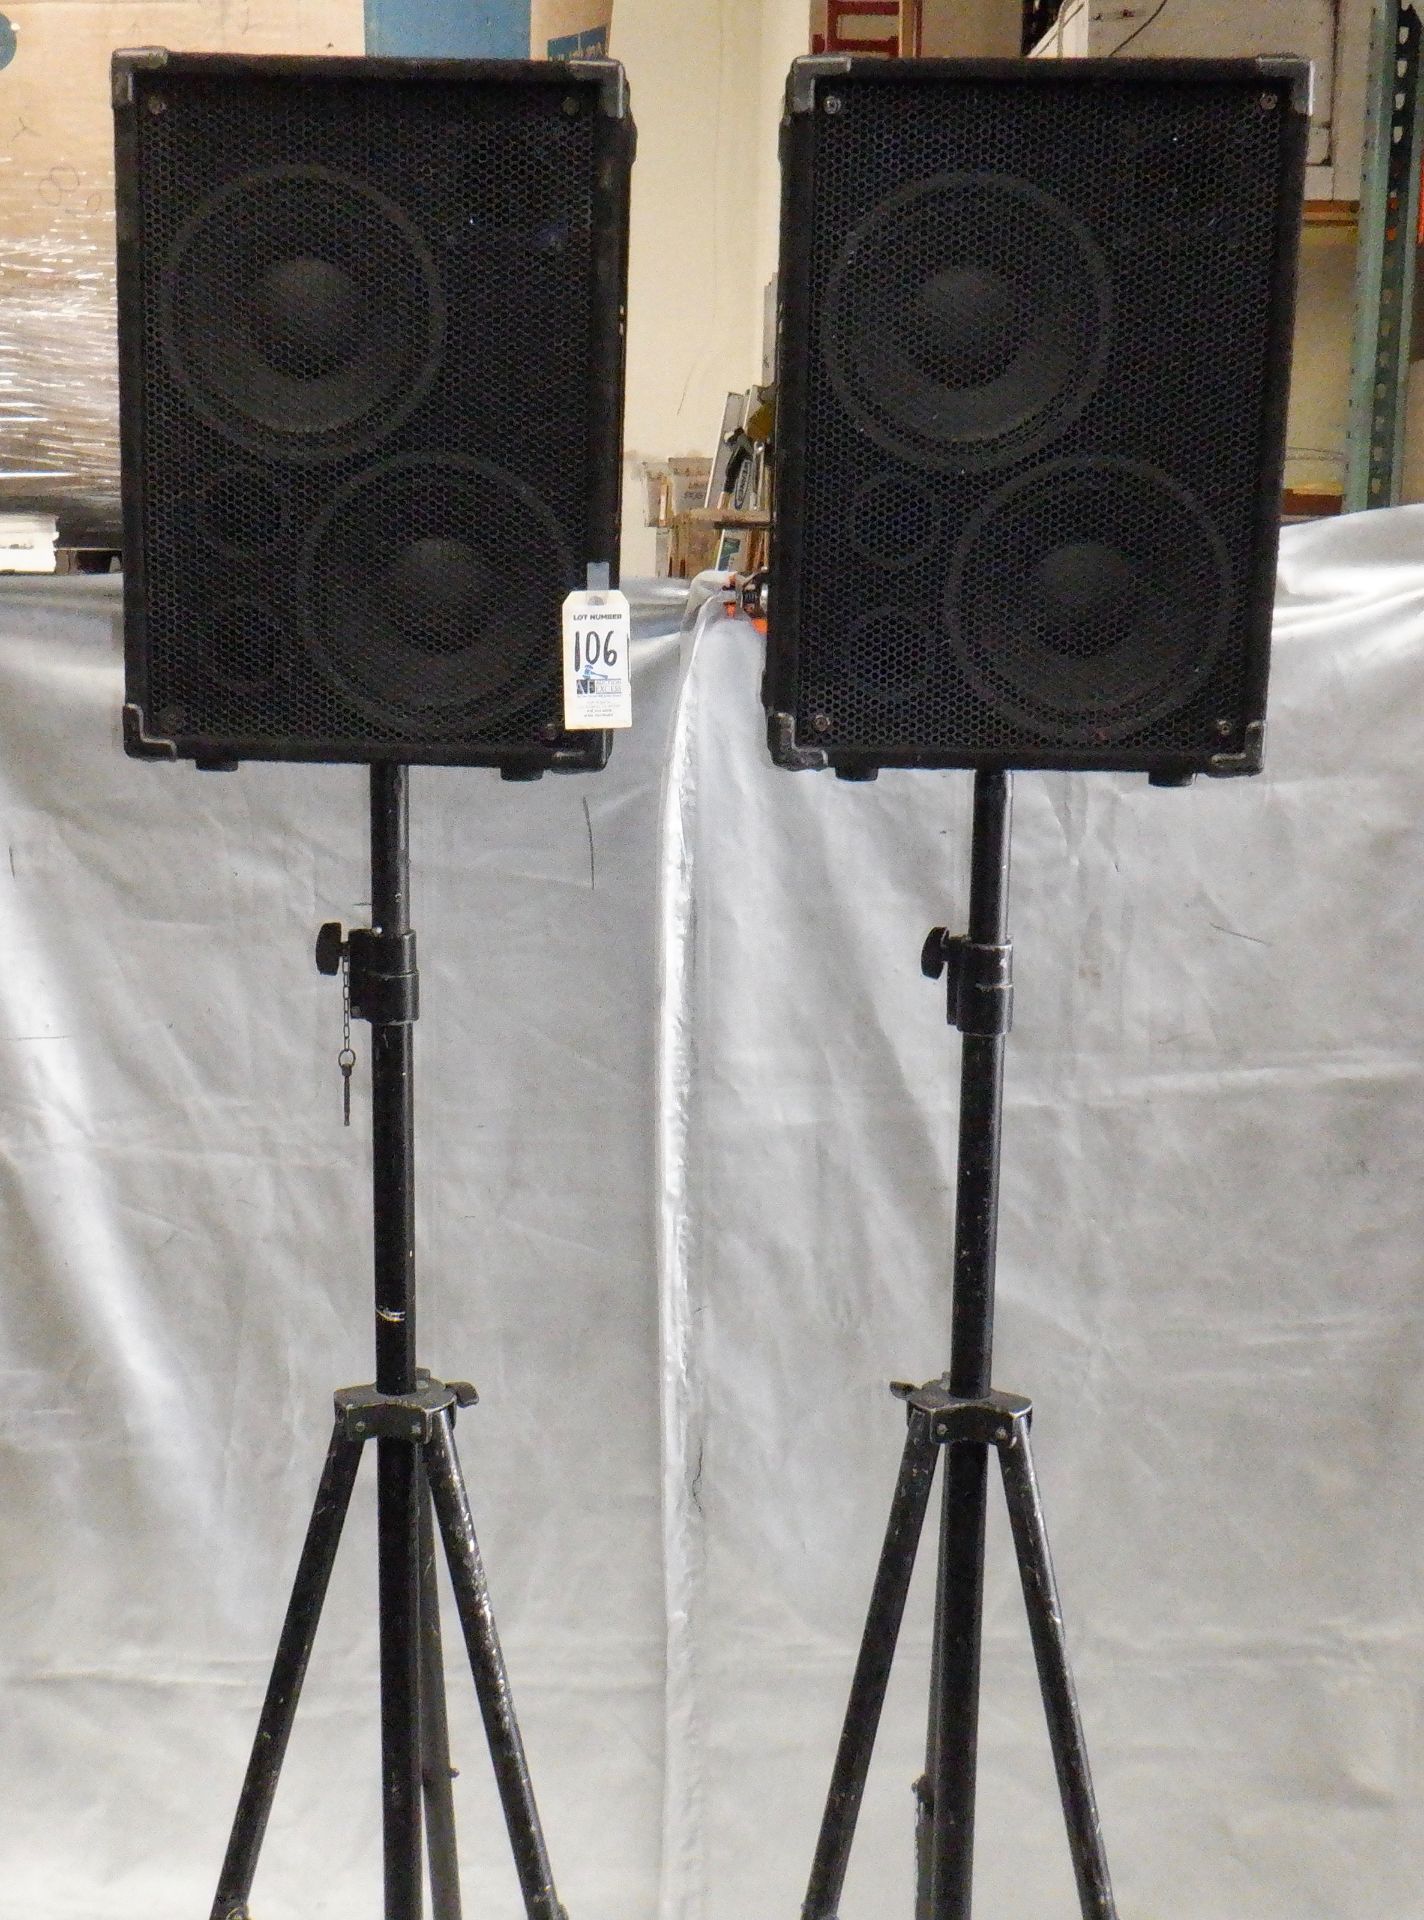 LOT OF 2 ACOUSTIC BASS SPEAKERS WITH STANDS - Image 3 of 7